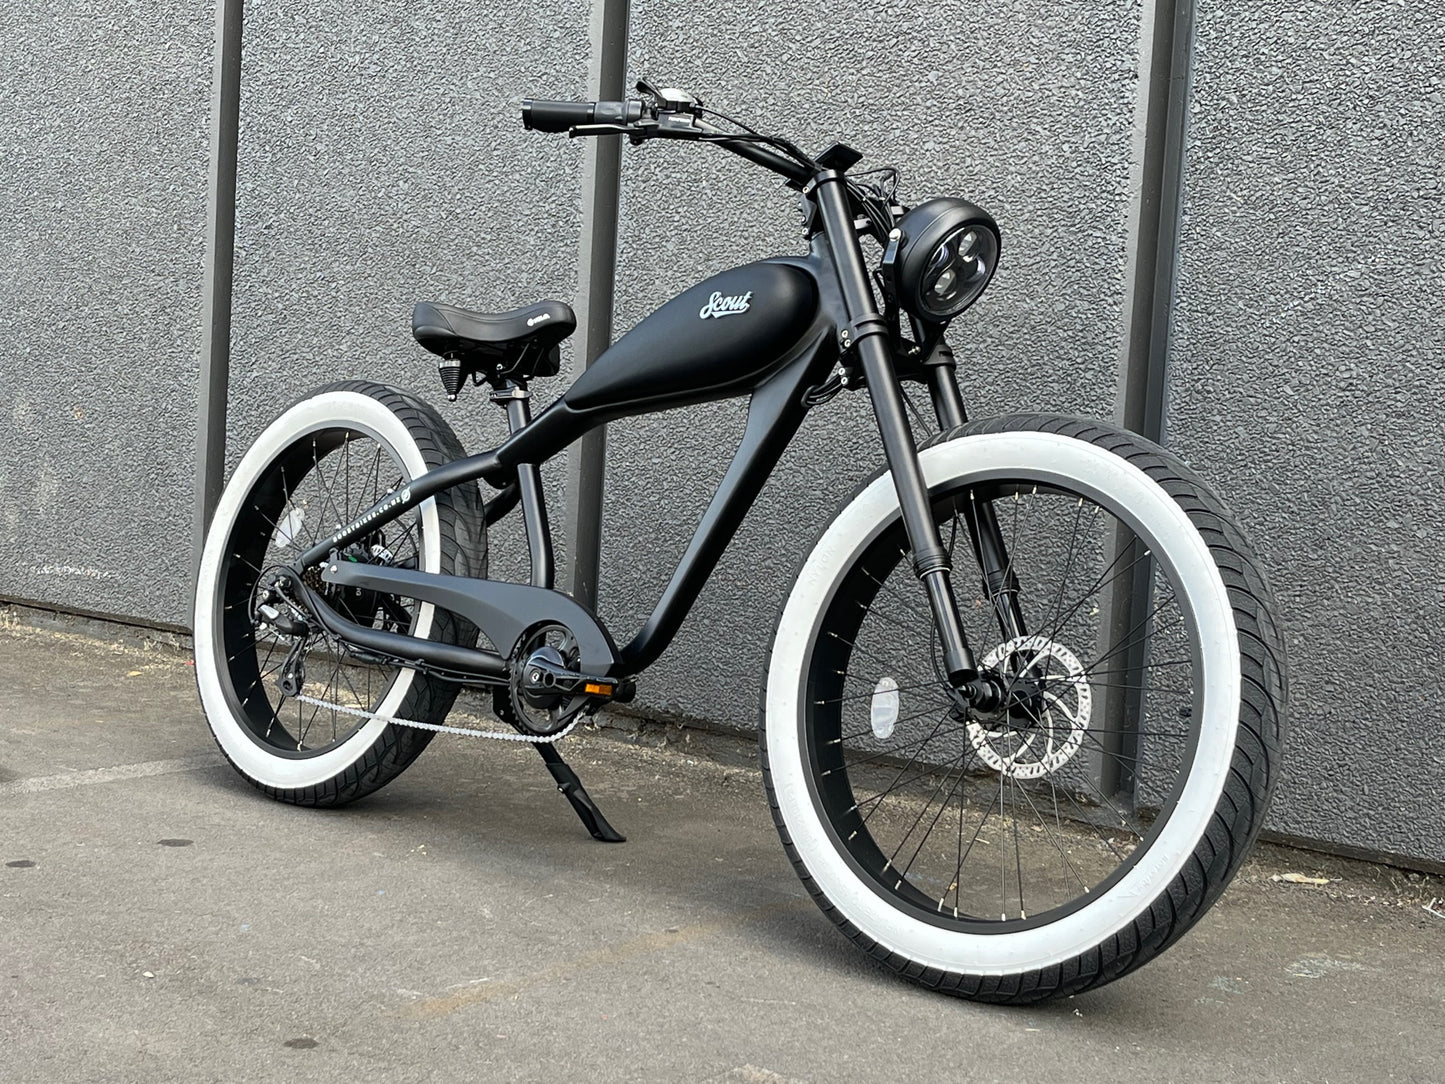 Scout Electric Motorbike from Boostbikes. The Most Comfortable Cruiser ebike ever. Choice of frame and trim and tyre combinations. All Terrain, STREET or Whitewall tyres.